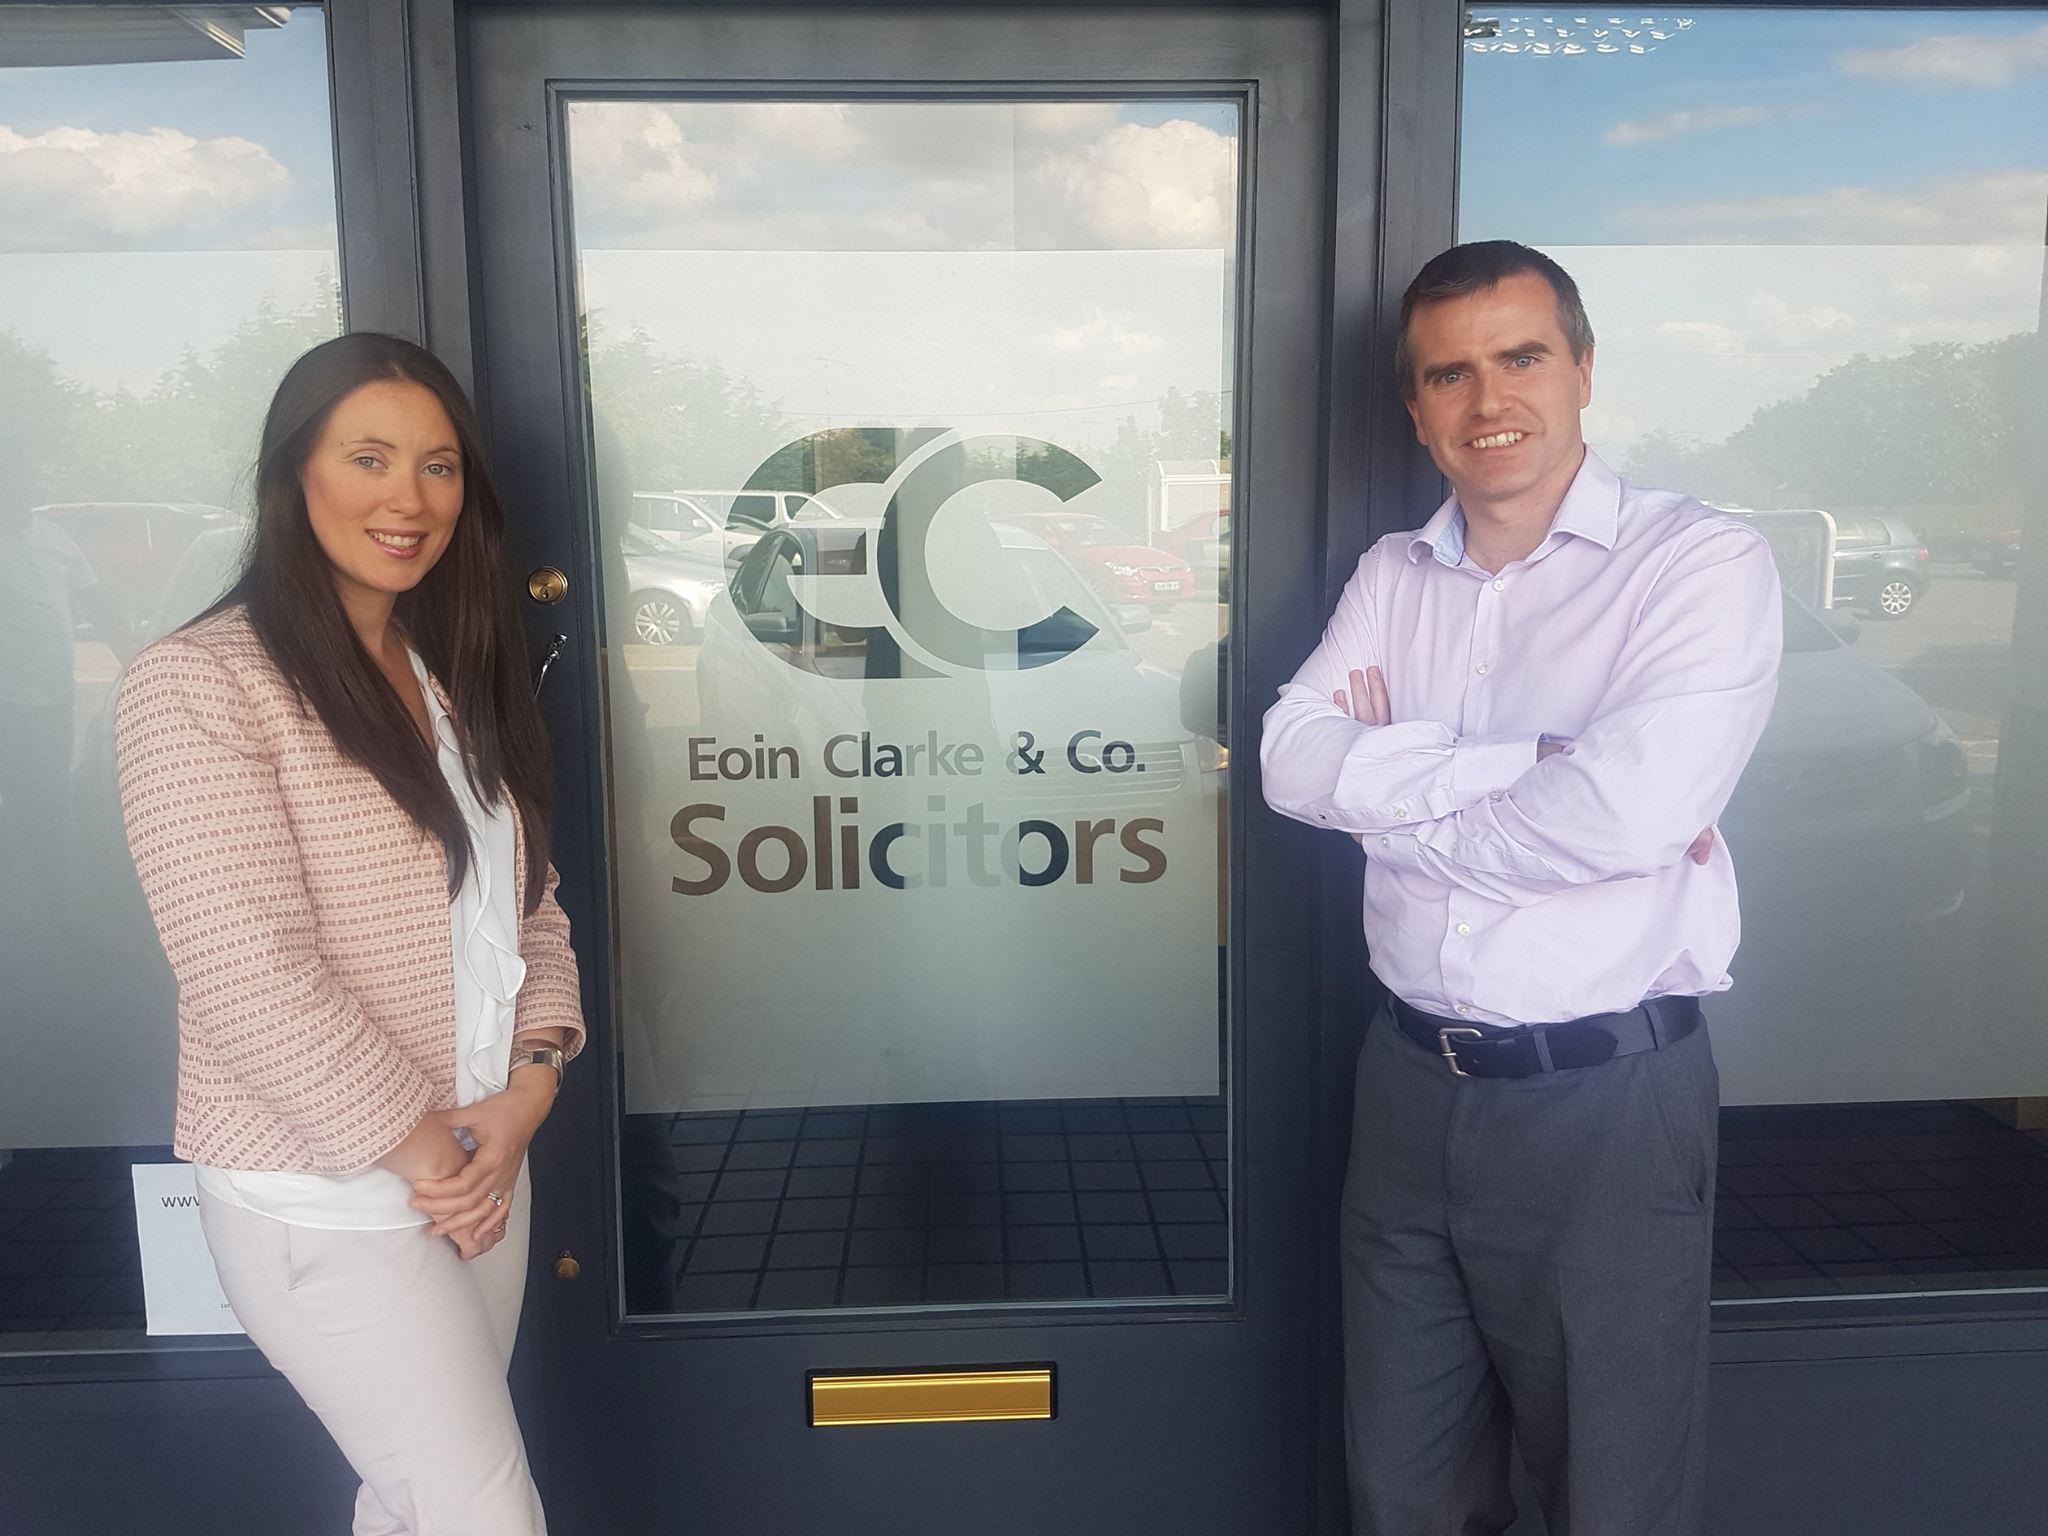 Eoin Clarke & Co Solicitors 4